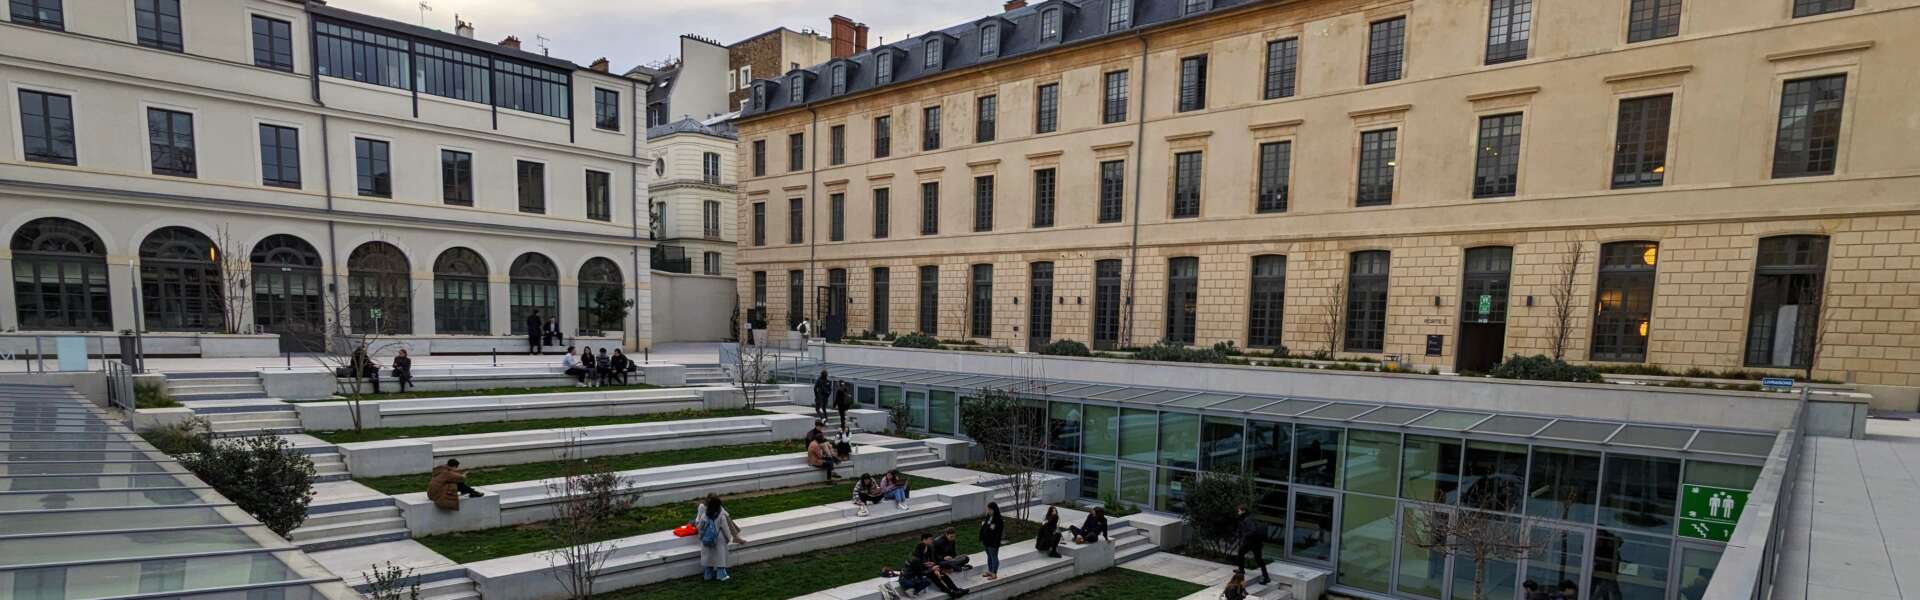 A view of two long Parisian buildings with steps down in a grassy courtyard